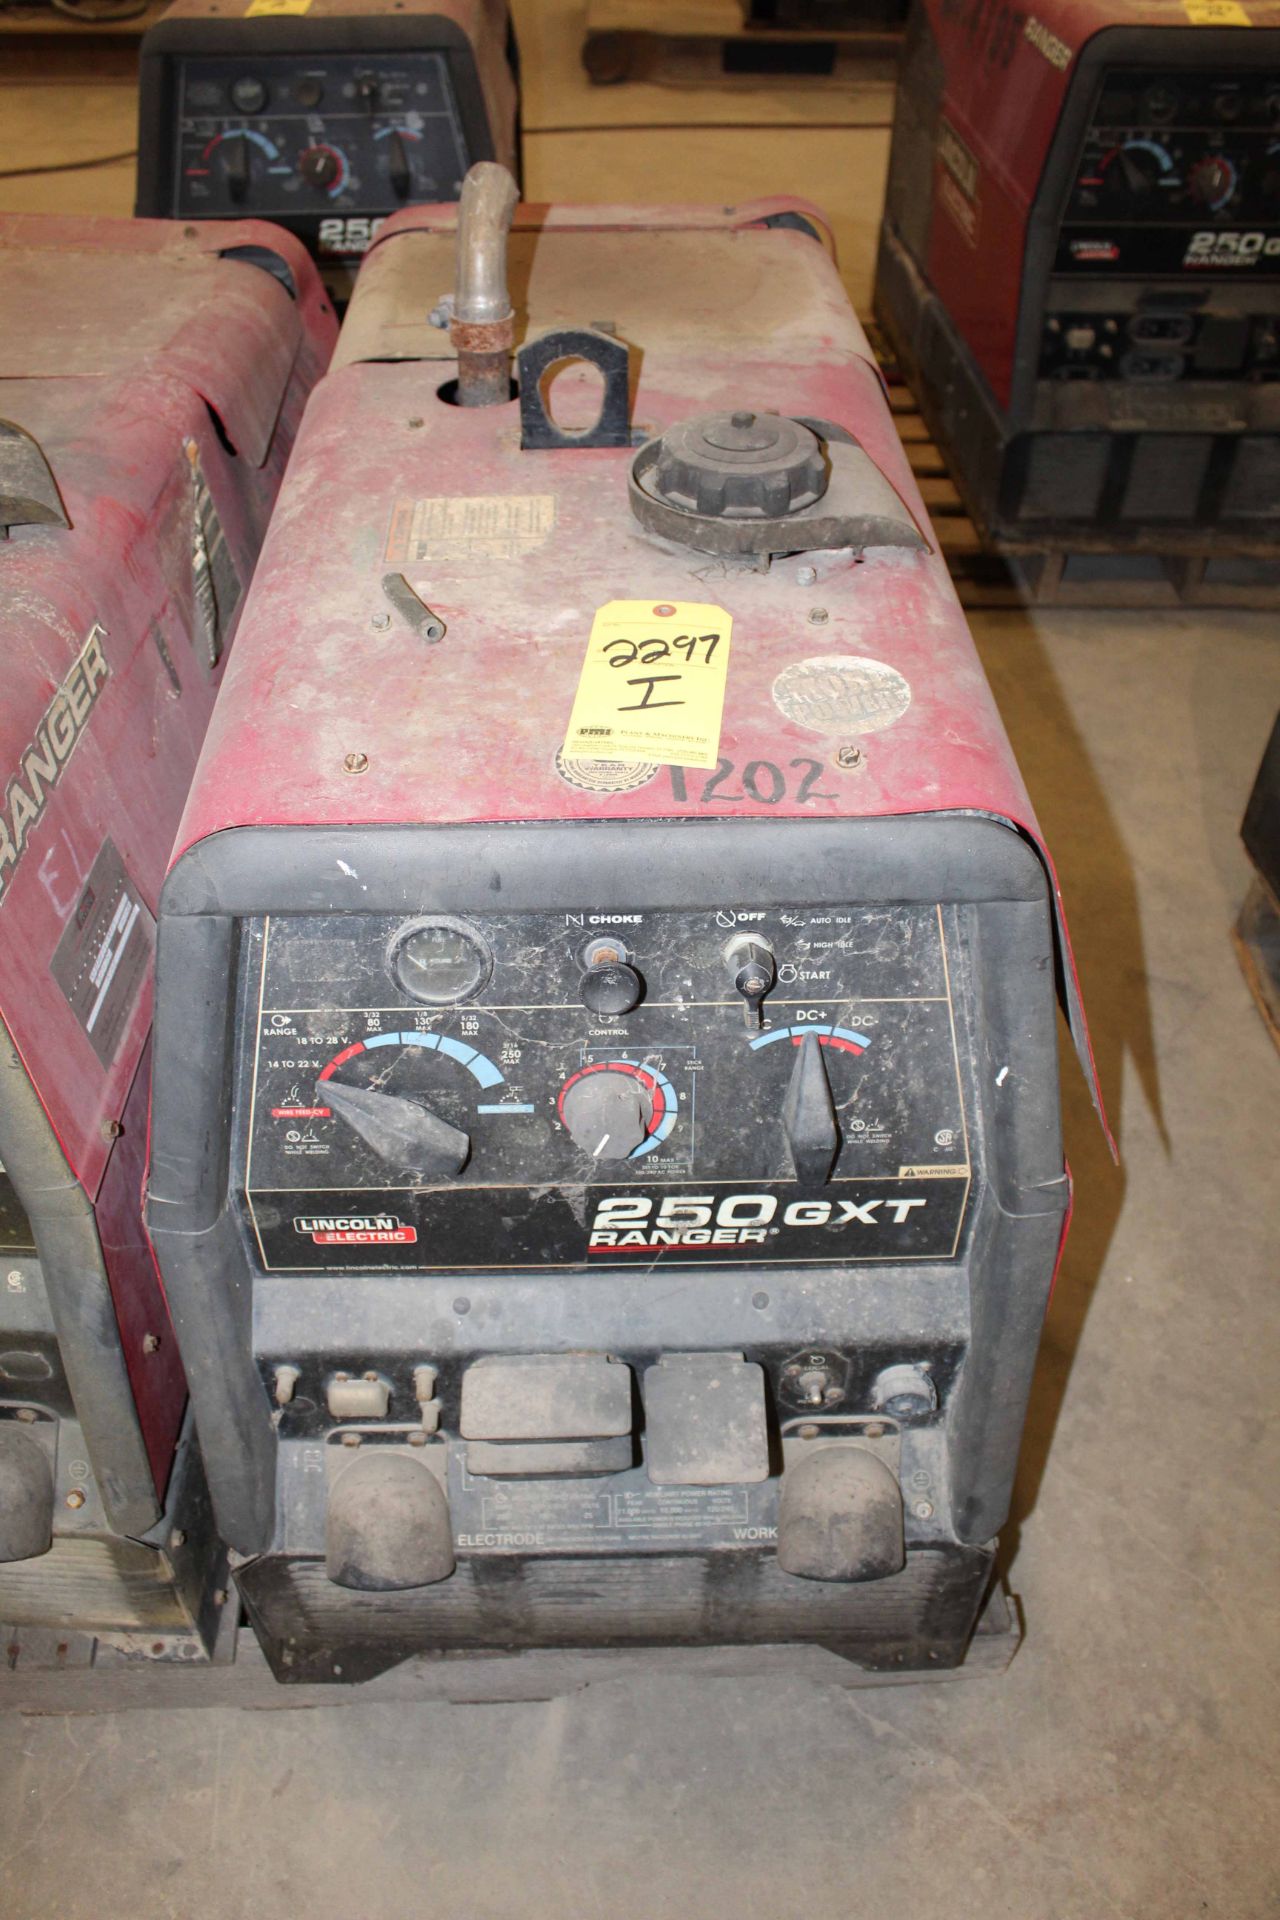 PORTABLE WELDER, LINCOLN MDL. RANGER 250GXT, gasoline pwrd., S/N N.A., (out of service)